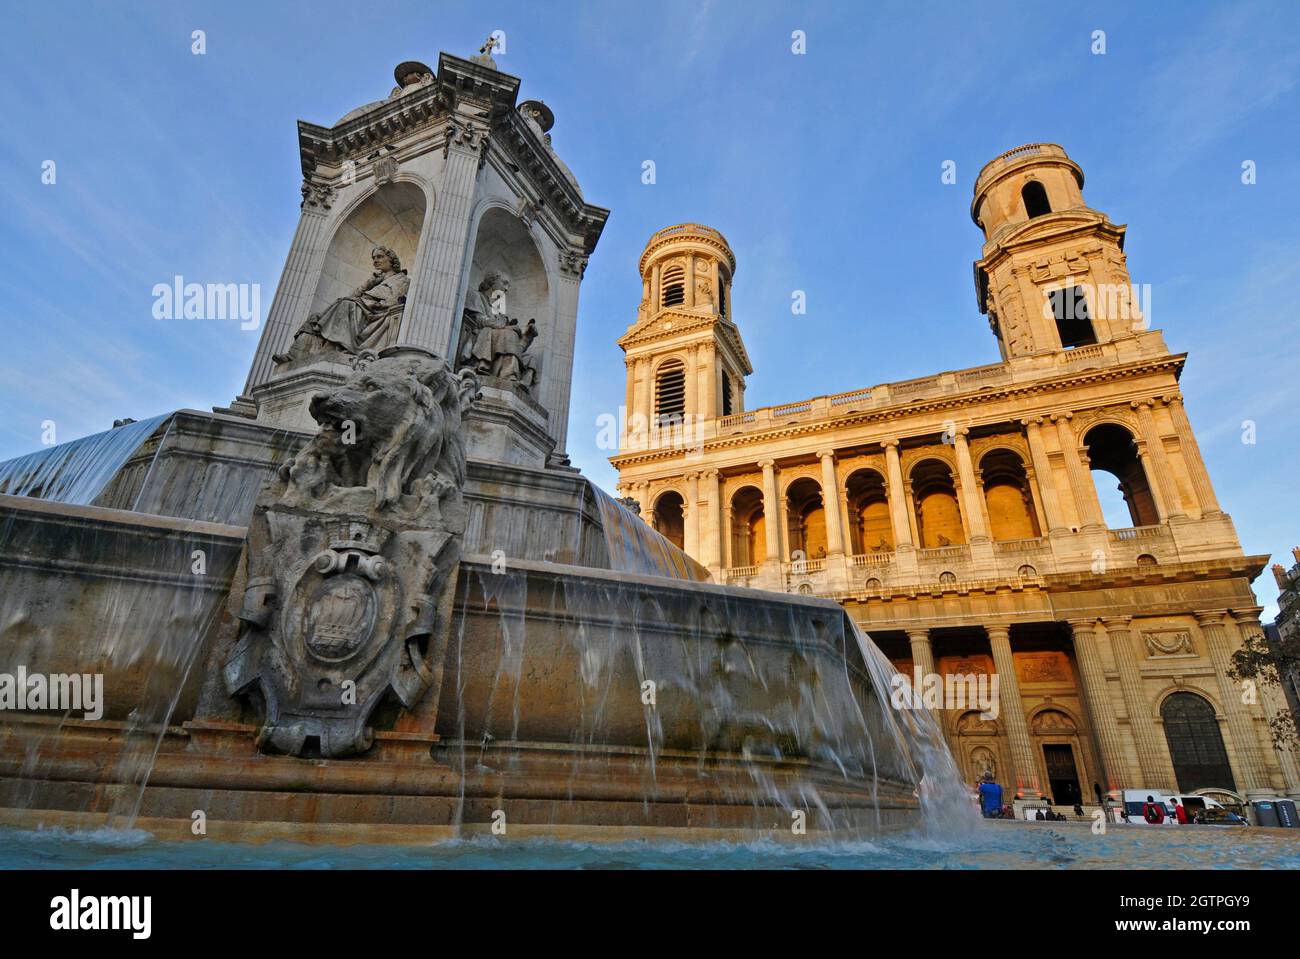 The Fontaine Saint-Sulpice, also known as the Fountain of the Four Bishops, stands before the landmark Église Saint-Sulpice church in Paris. Stock Photo